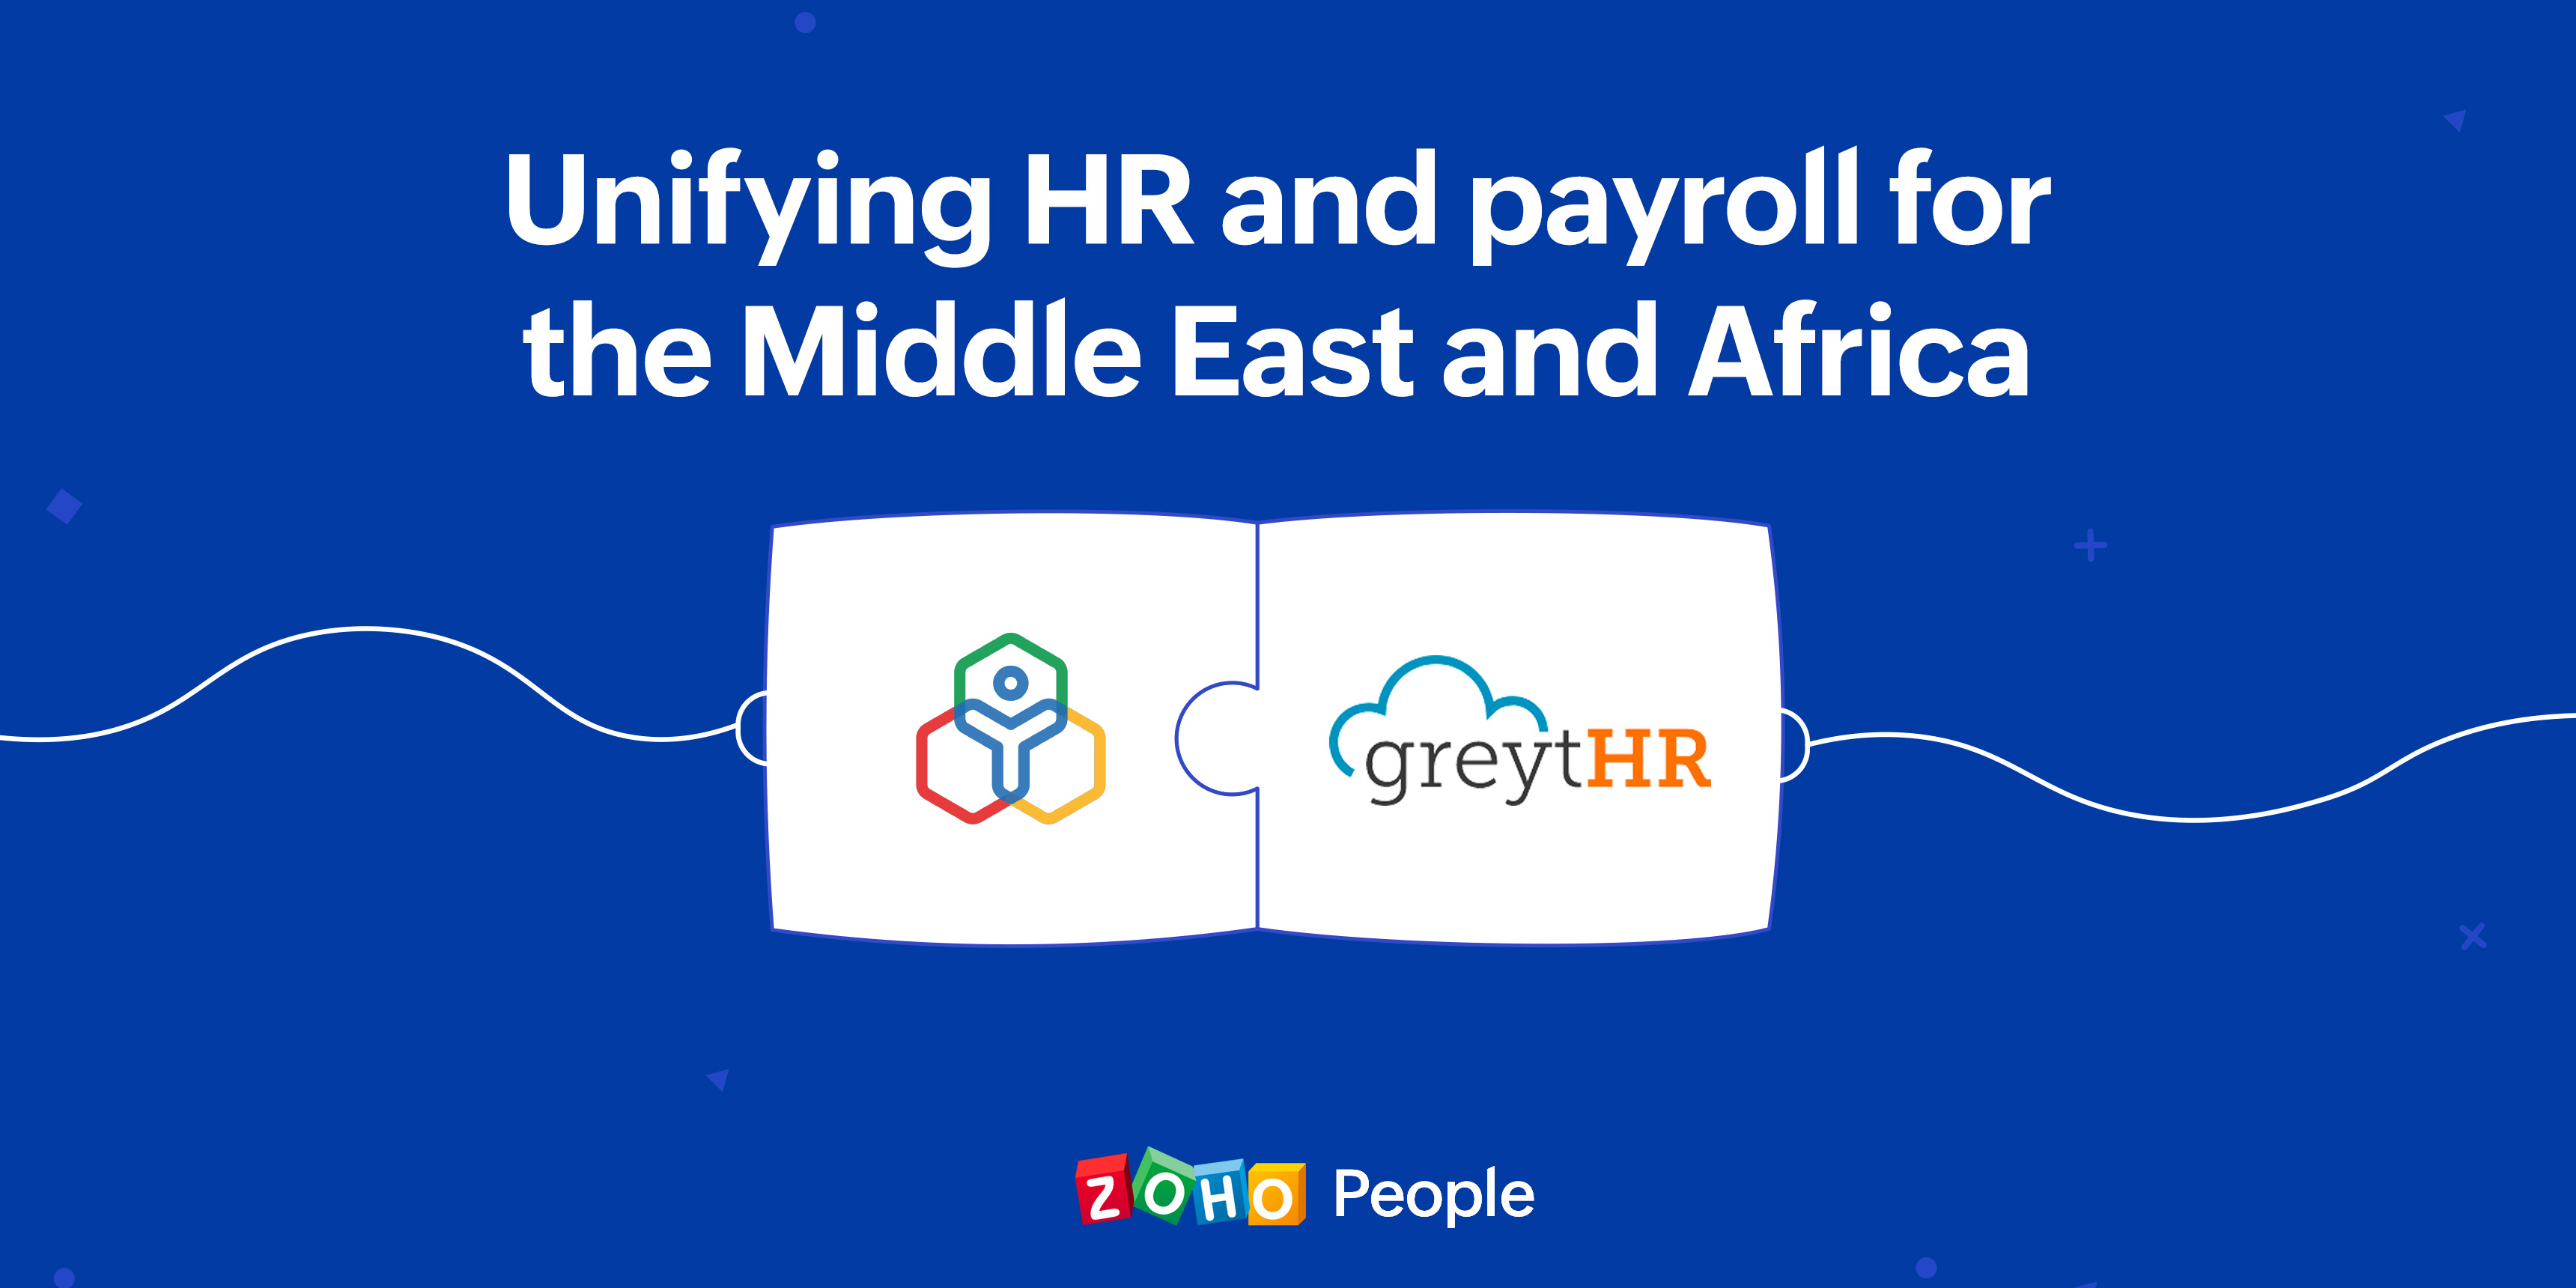 Unifying HR and payroll for the Middle East and Africa: Zoho People partners with GreytHR